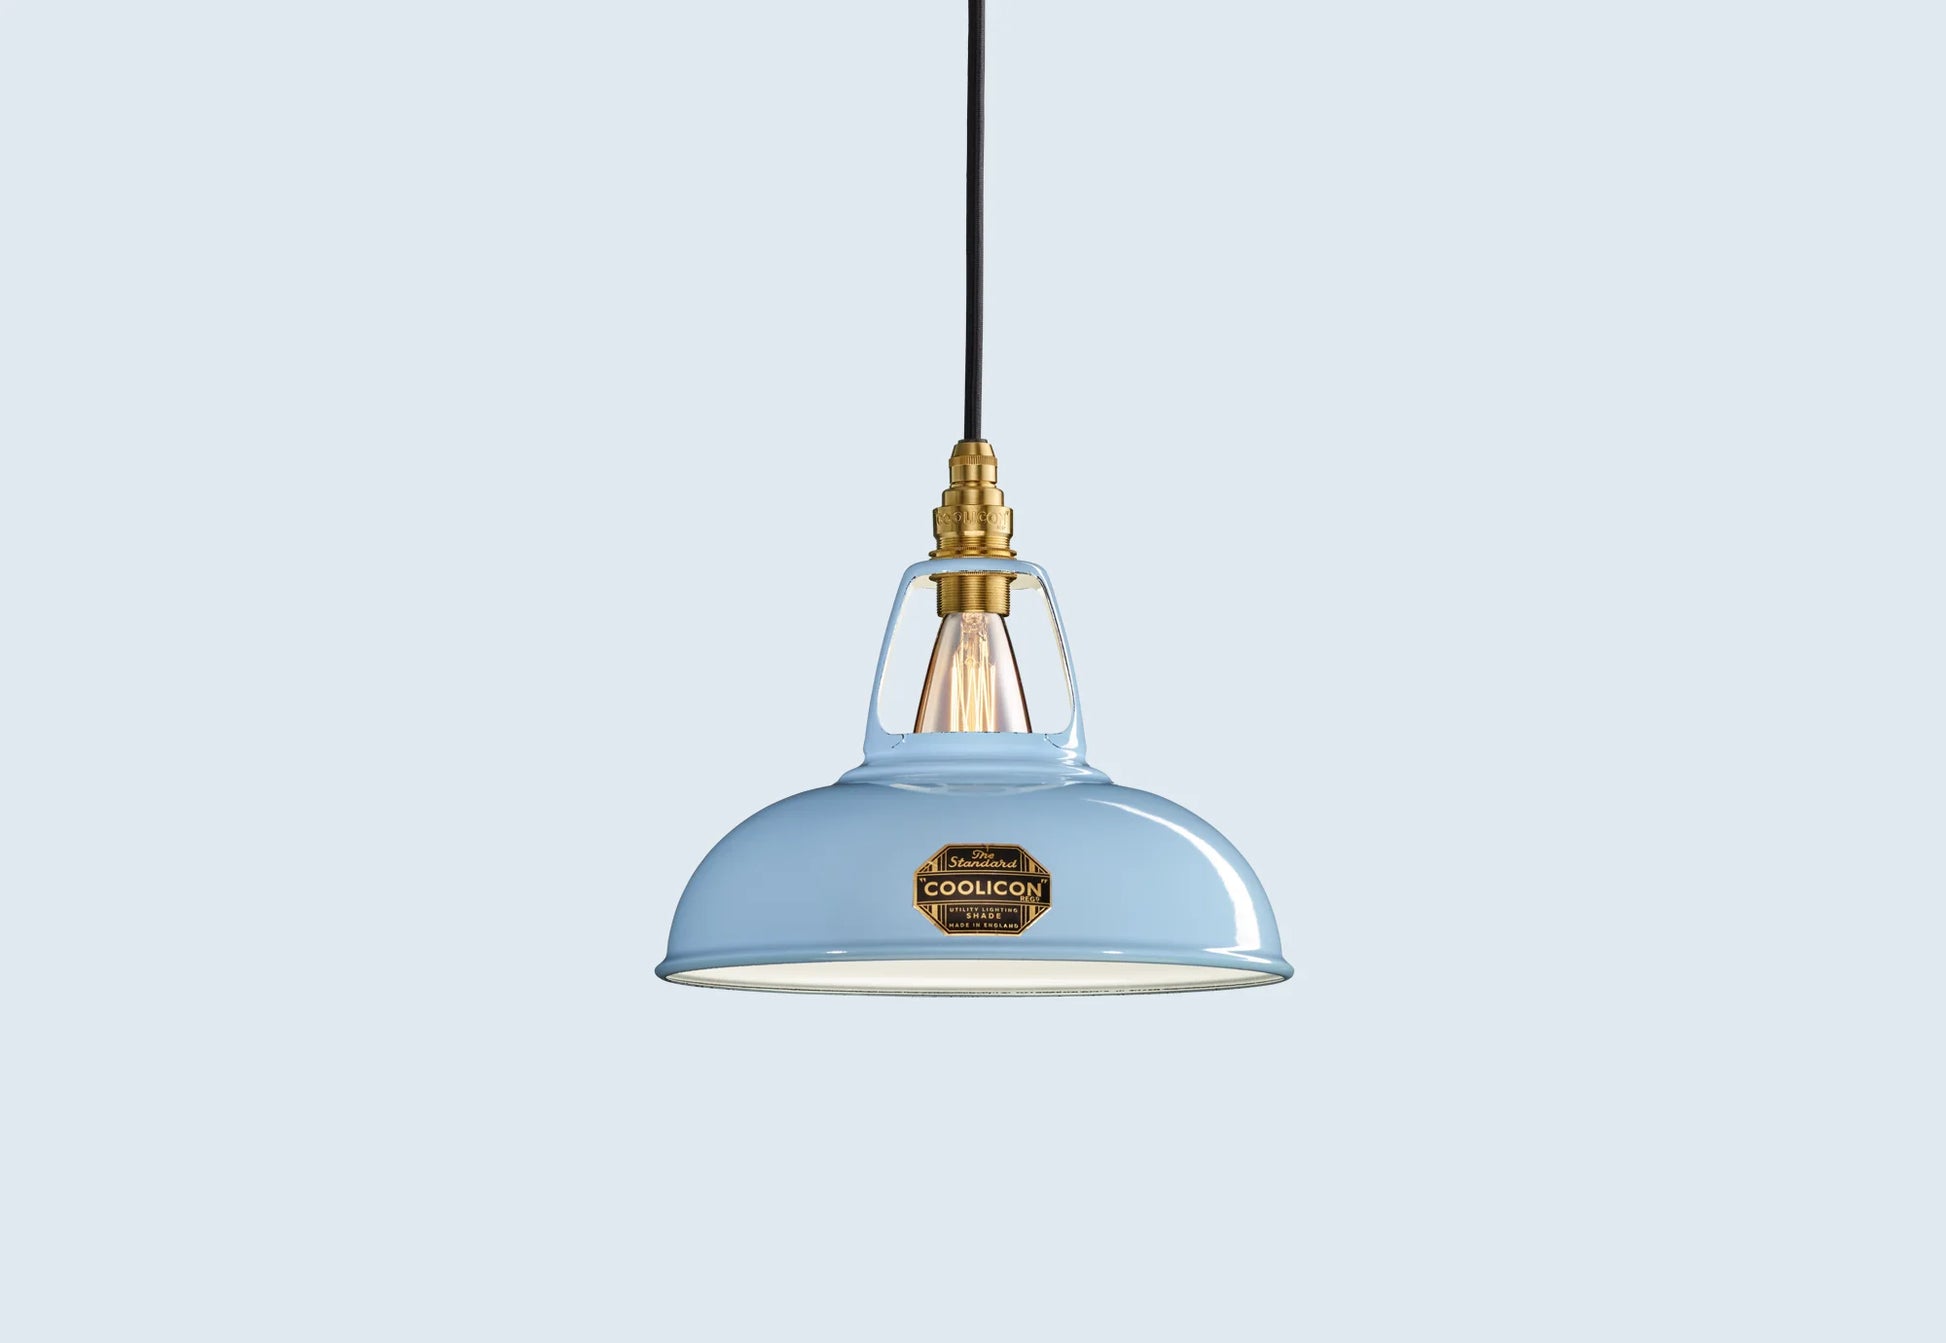 Sky Blue Coolicon lampshade with a Brass pendant set over a light blue background